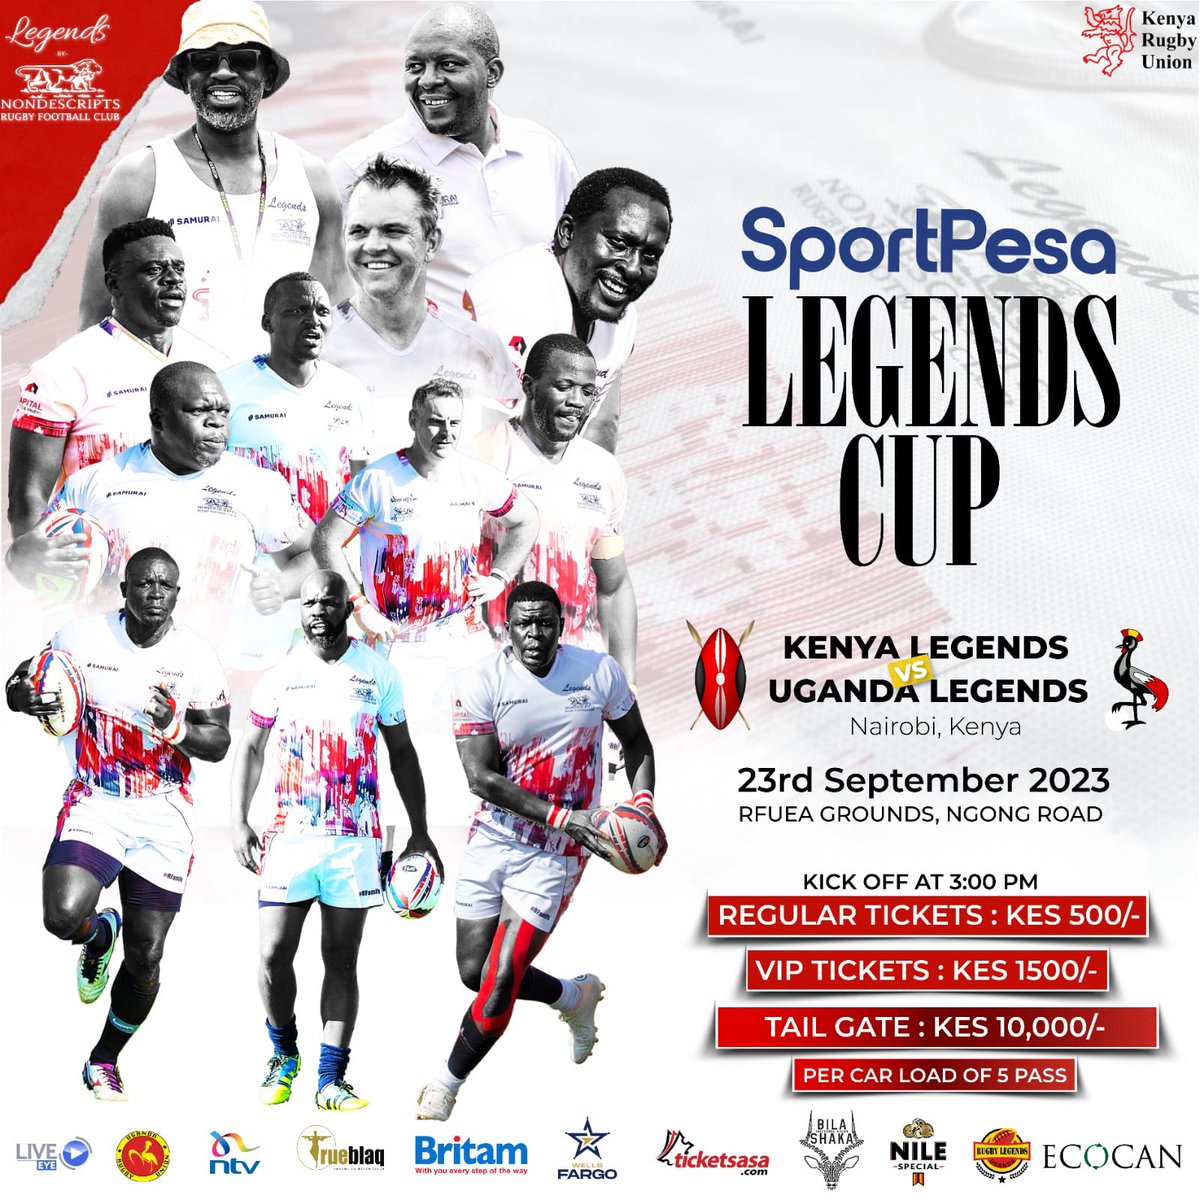 Hey guys, get your ticket and come watch Kenya legends Vs Uganda legends pale RFUEA grounds at 3pm 
Legends Cup
#SportPesaLegendsCup